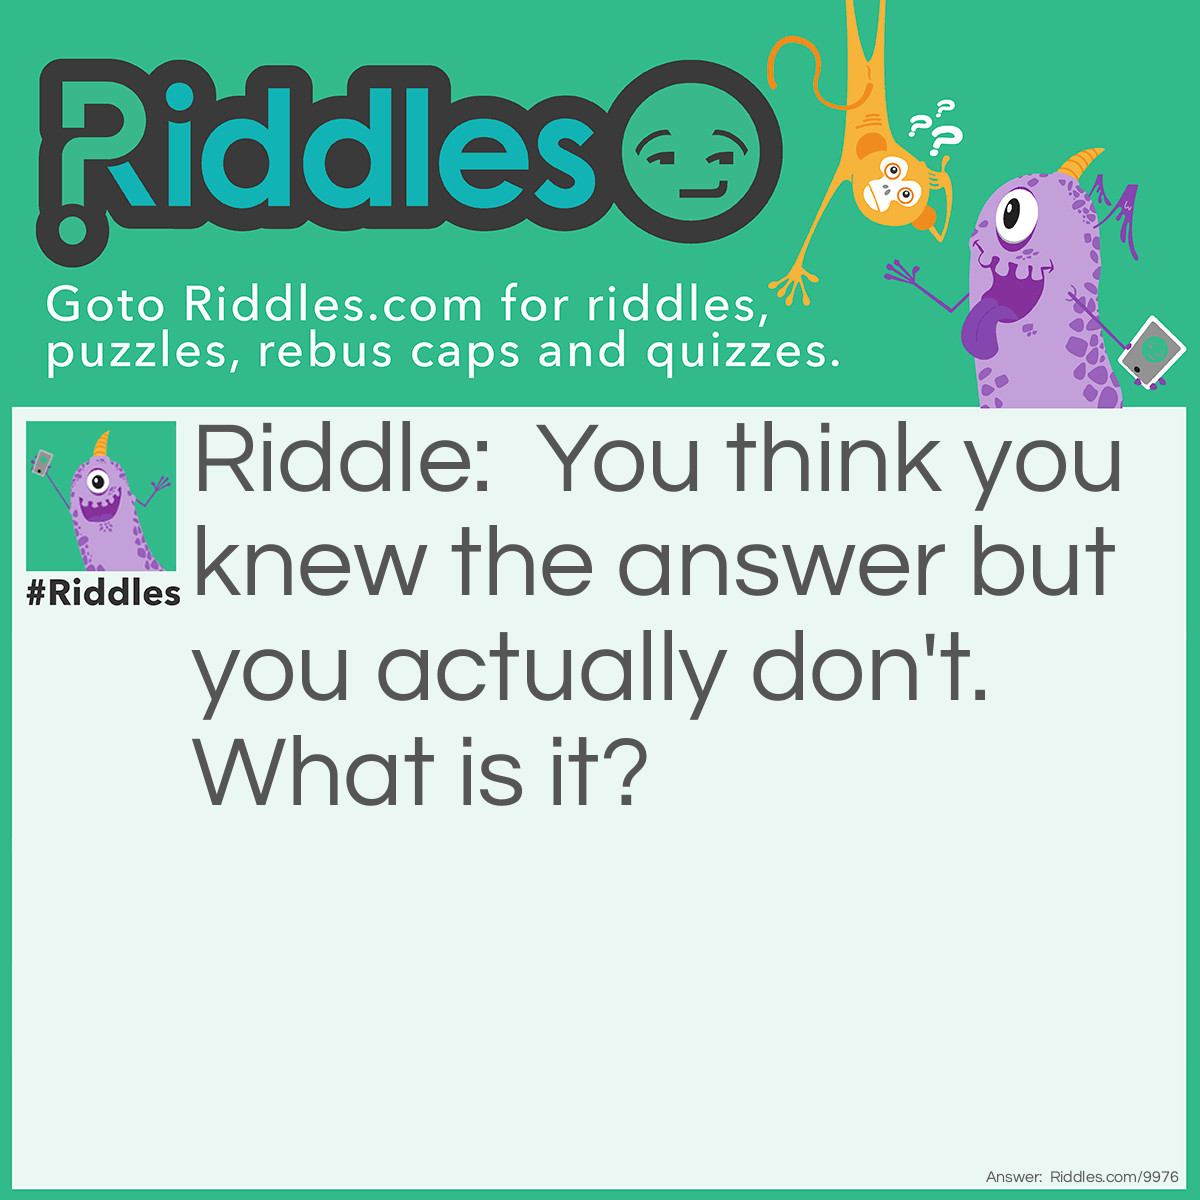 Riddle: You think you knew the answer but you actually don't. What is it? Answer: A Riddle.